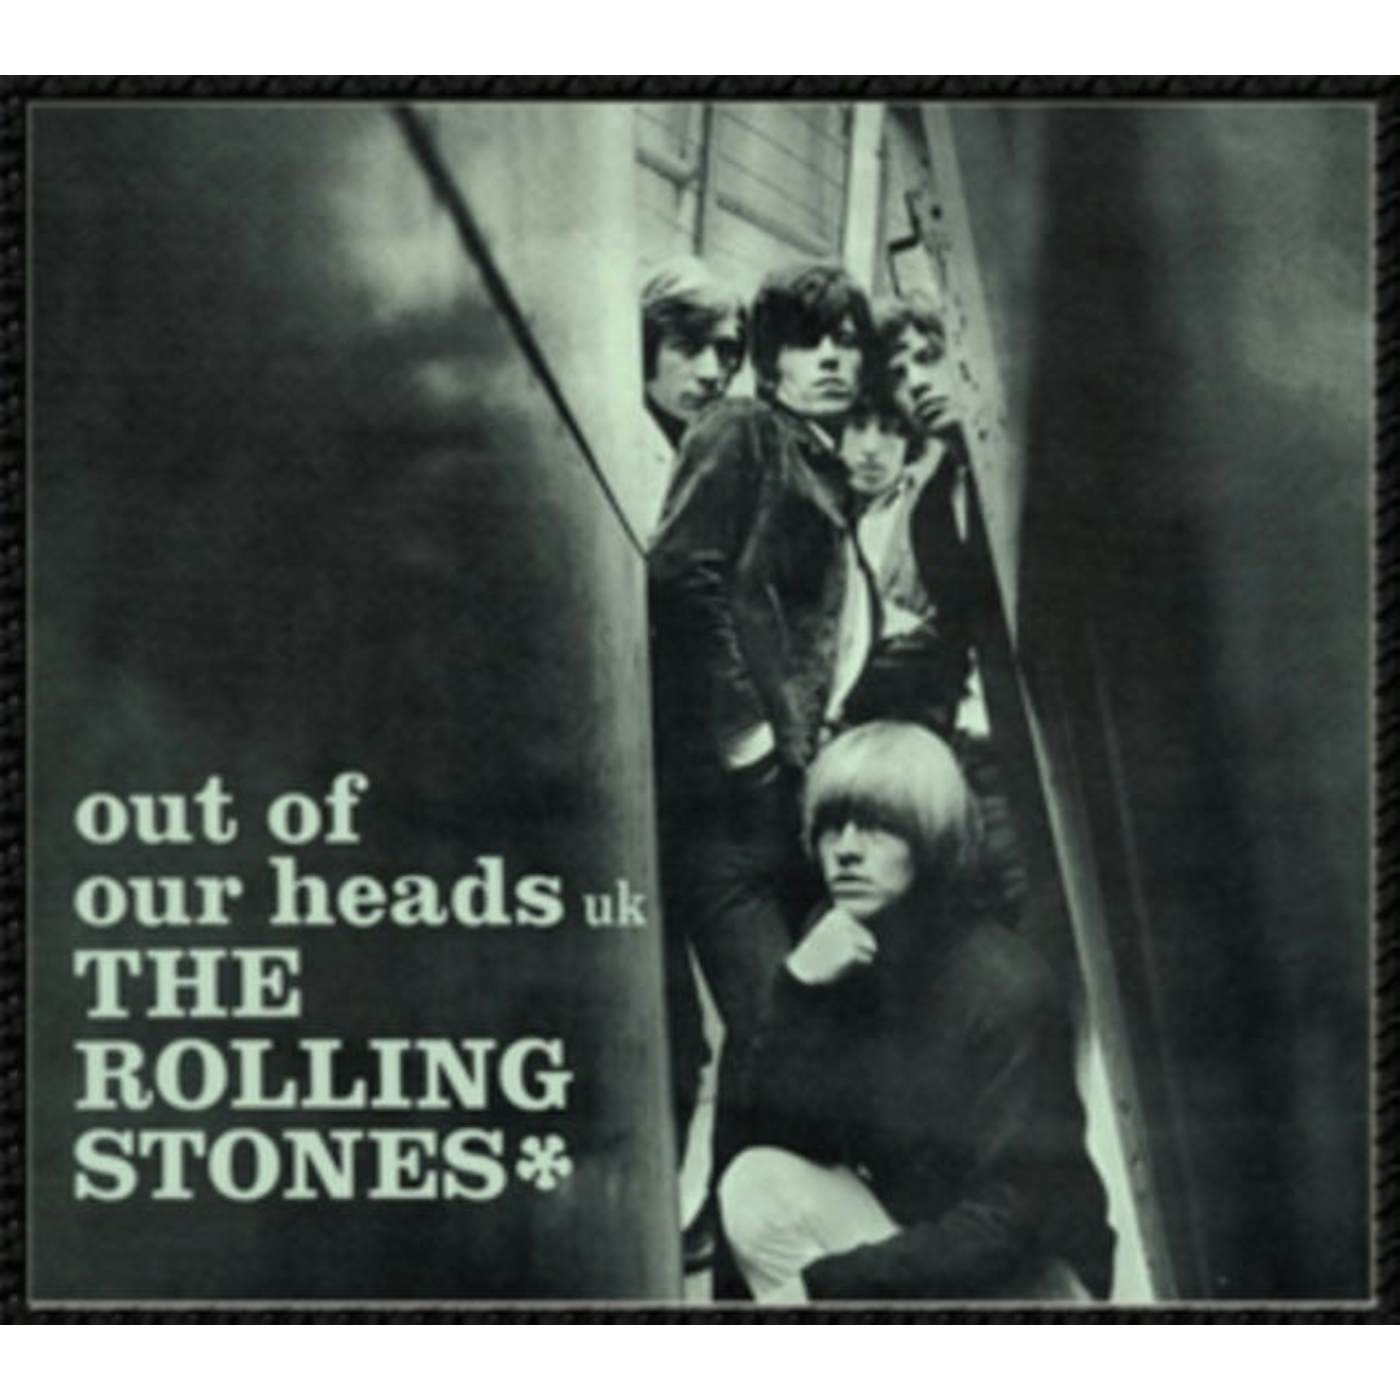 The Rolling Stones LP Vinyl Record - Out Of Our Heads